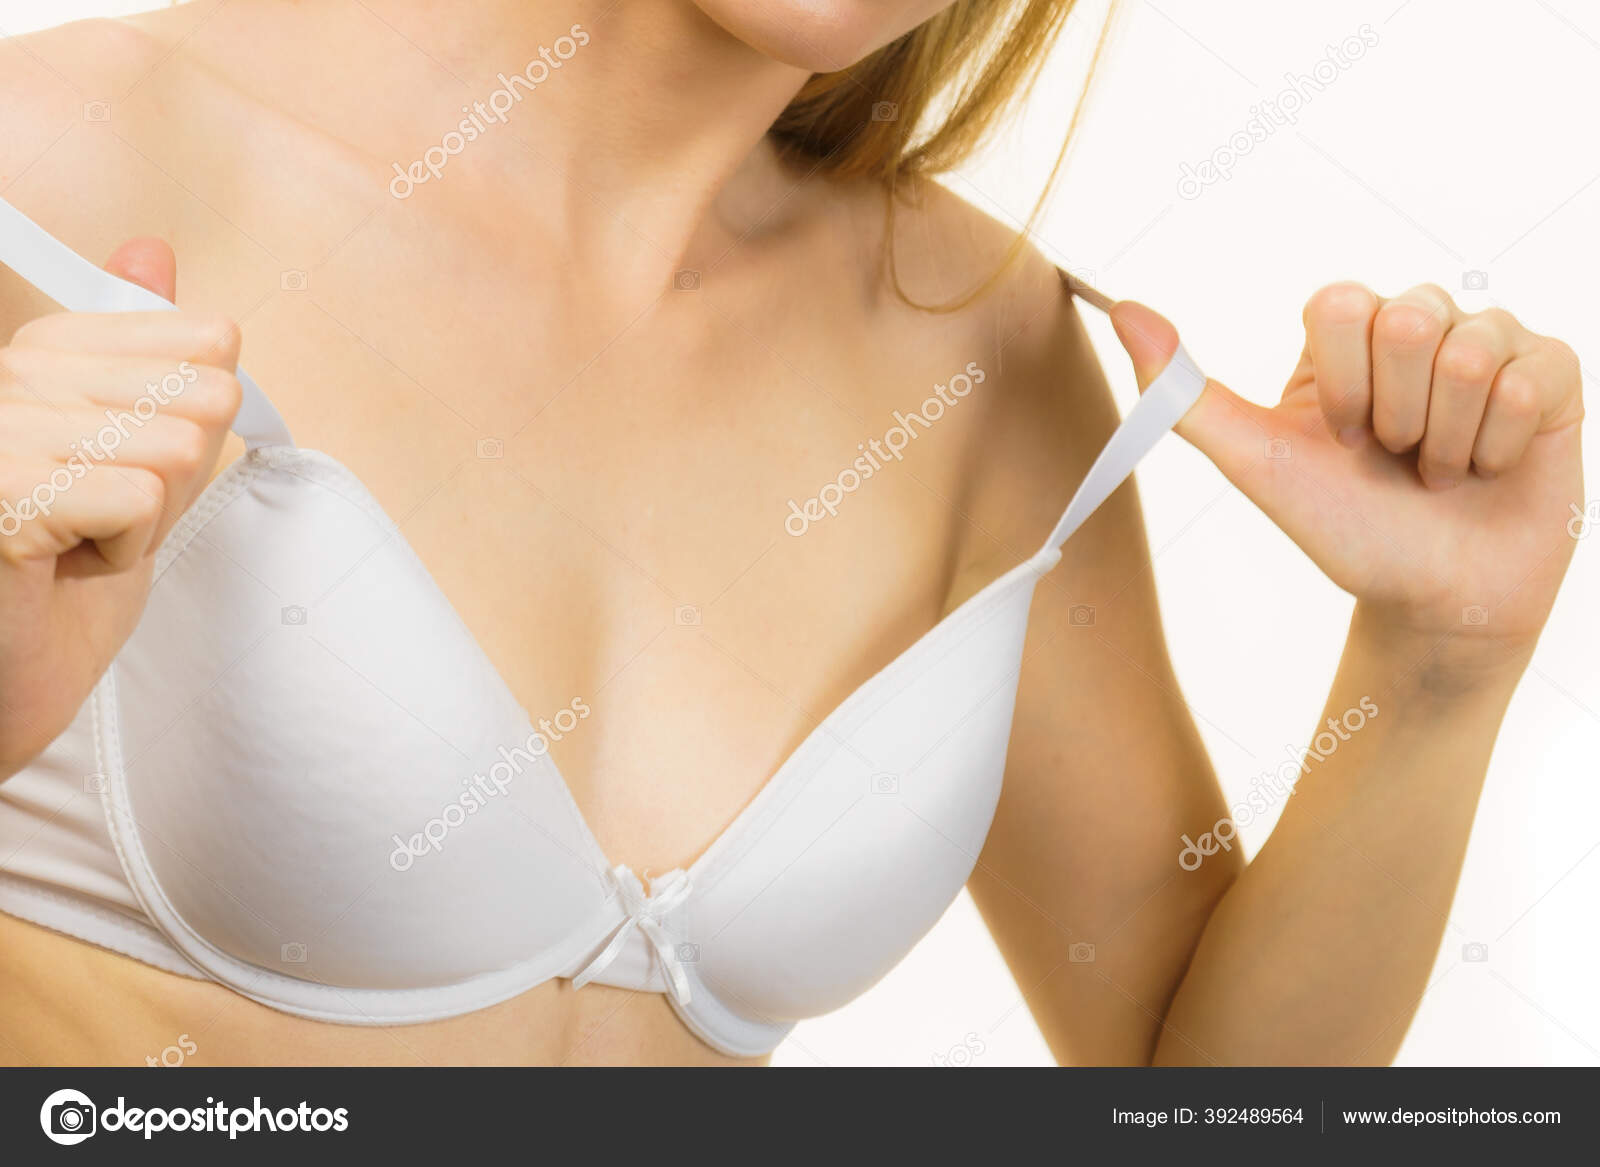 Young Slim Woman Holding Bra Strap. Straps Keep Falling Down Problem.  Female Breast In Lingerie. Bosom And Underwear Concept. Stock Photo,  Picture and Royalty Free Image. Image 143825707.